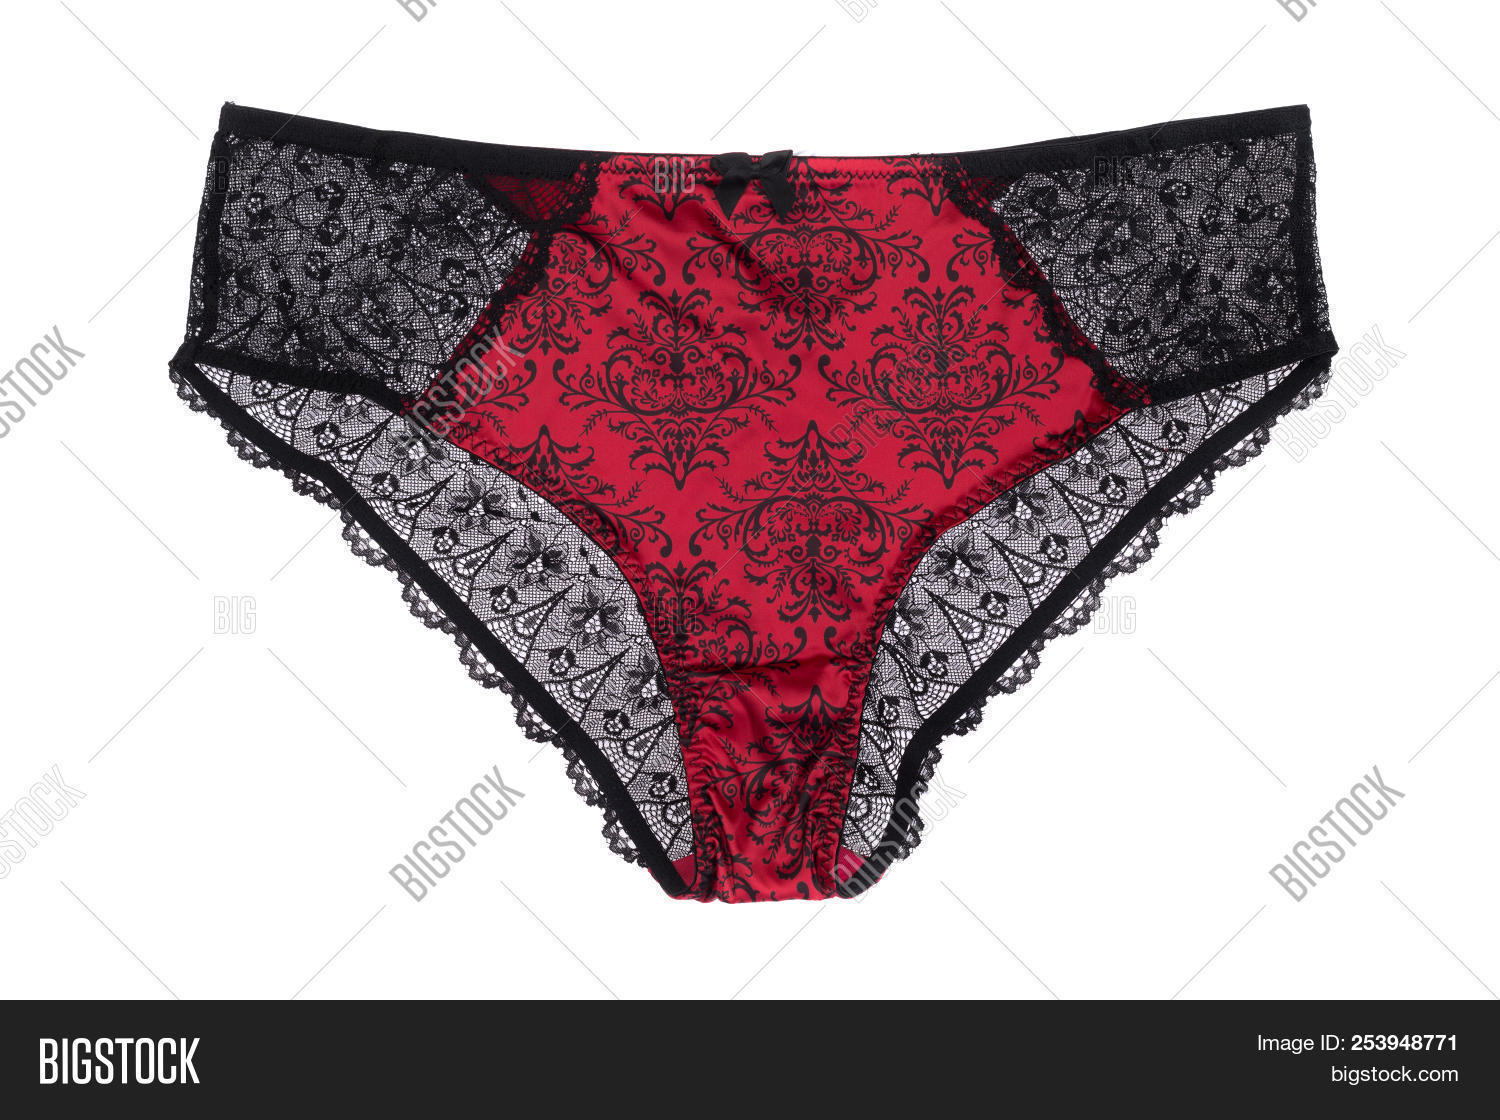 angie buckley recommends red and black lace panties pic